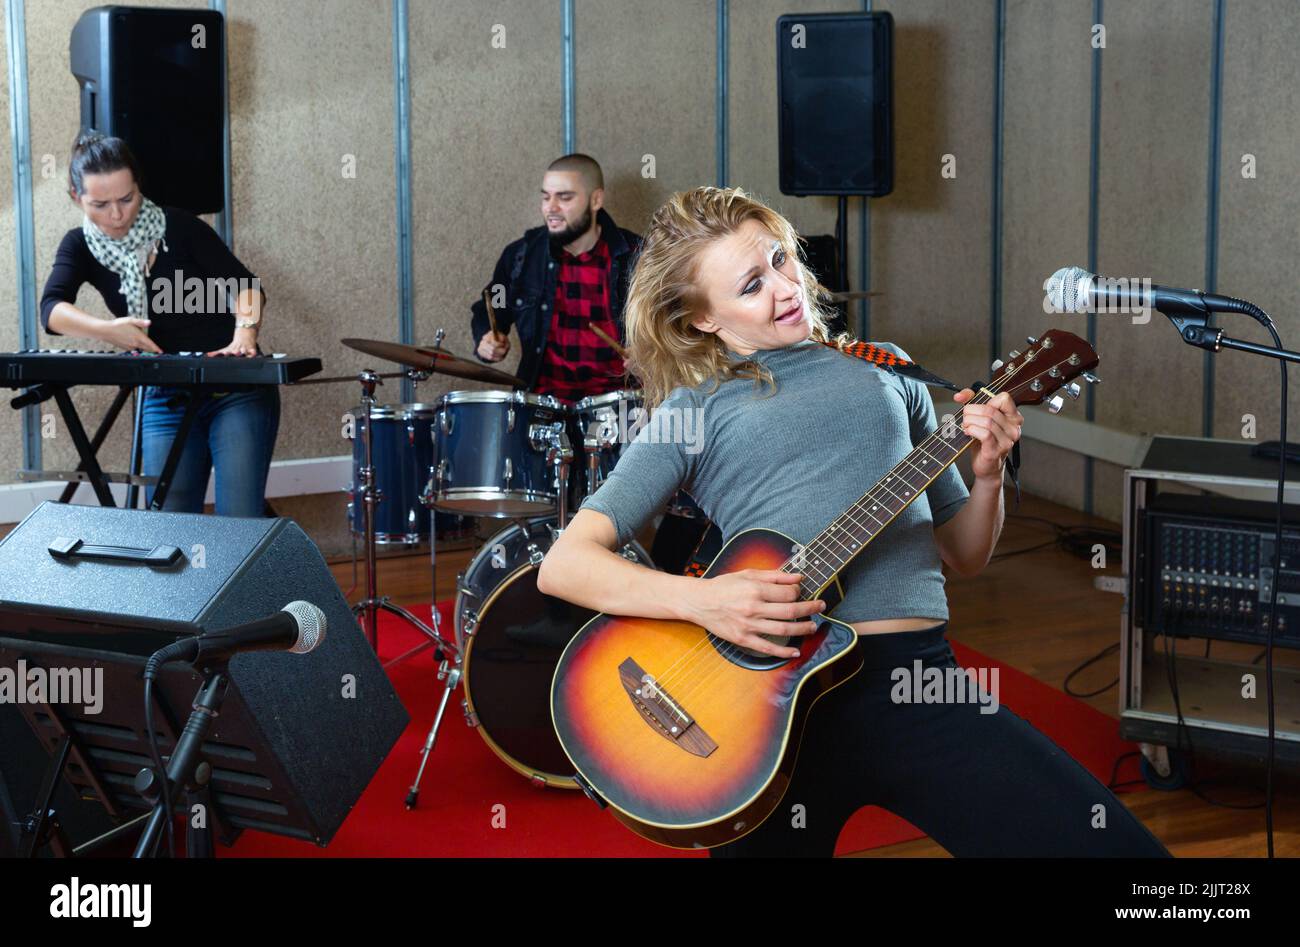 Attractive female soloist playing guitar and singing with her music band in sound studio Stock Photo